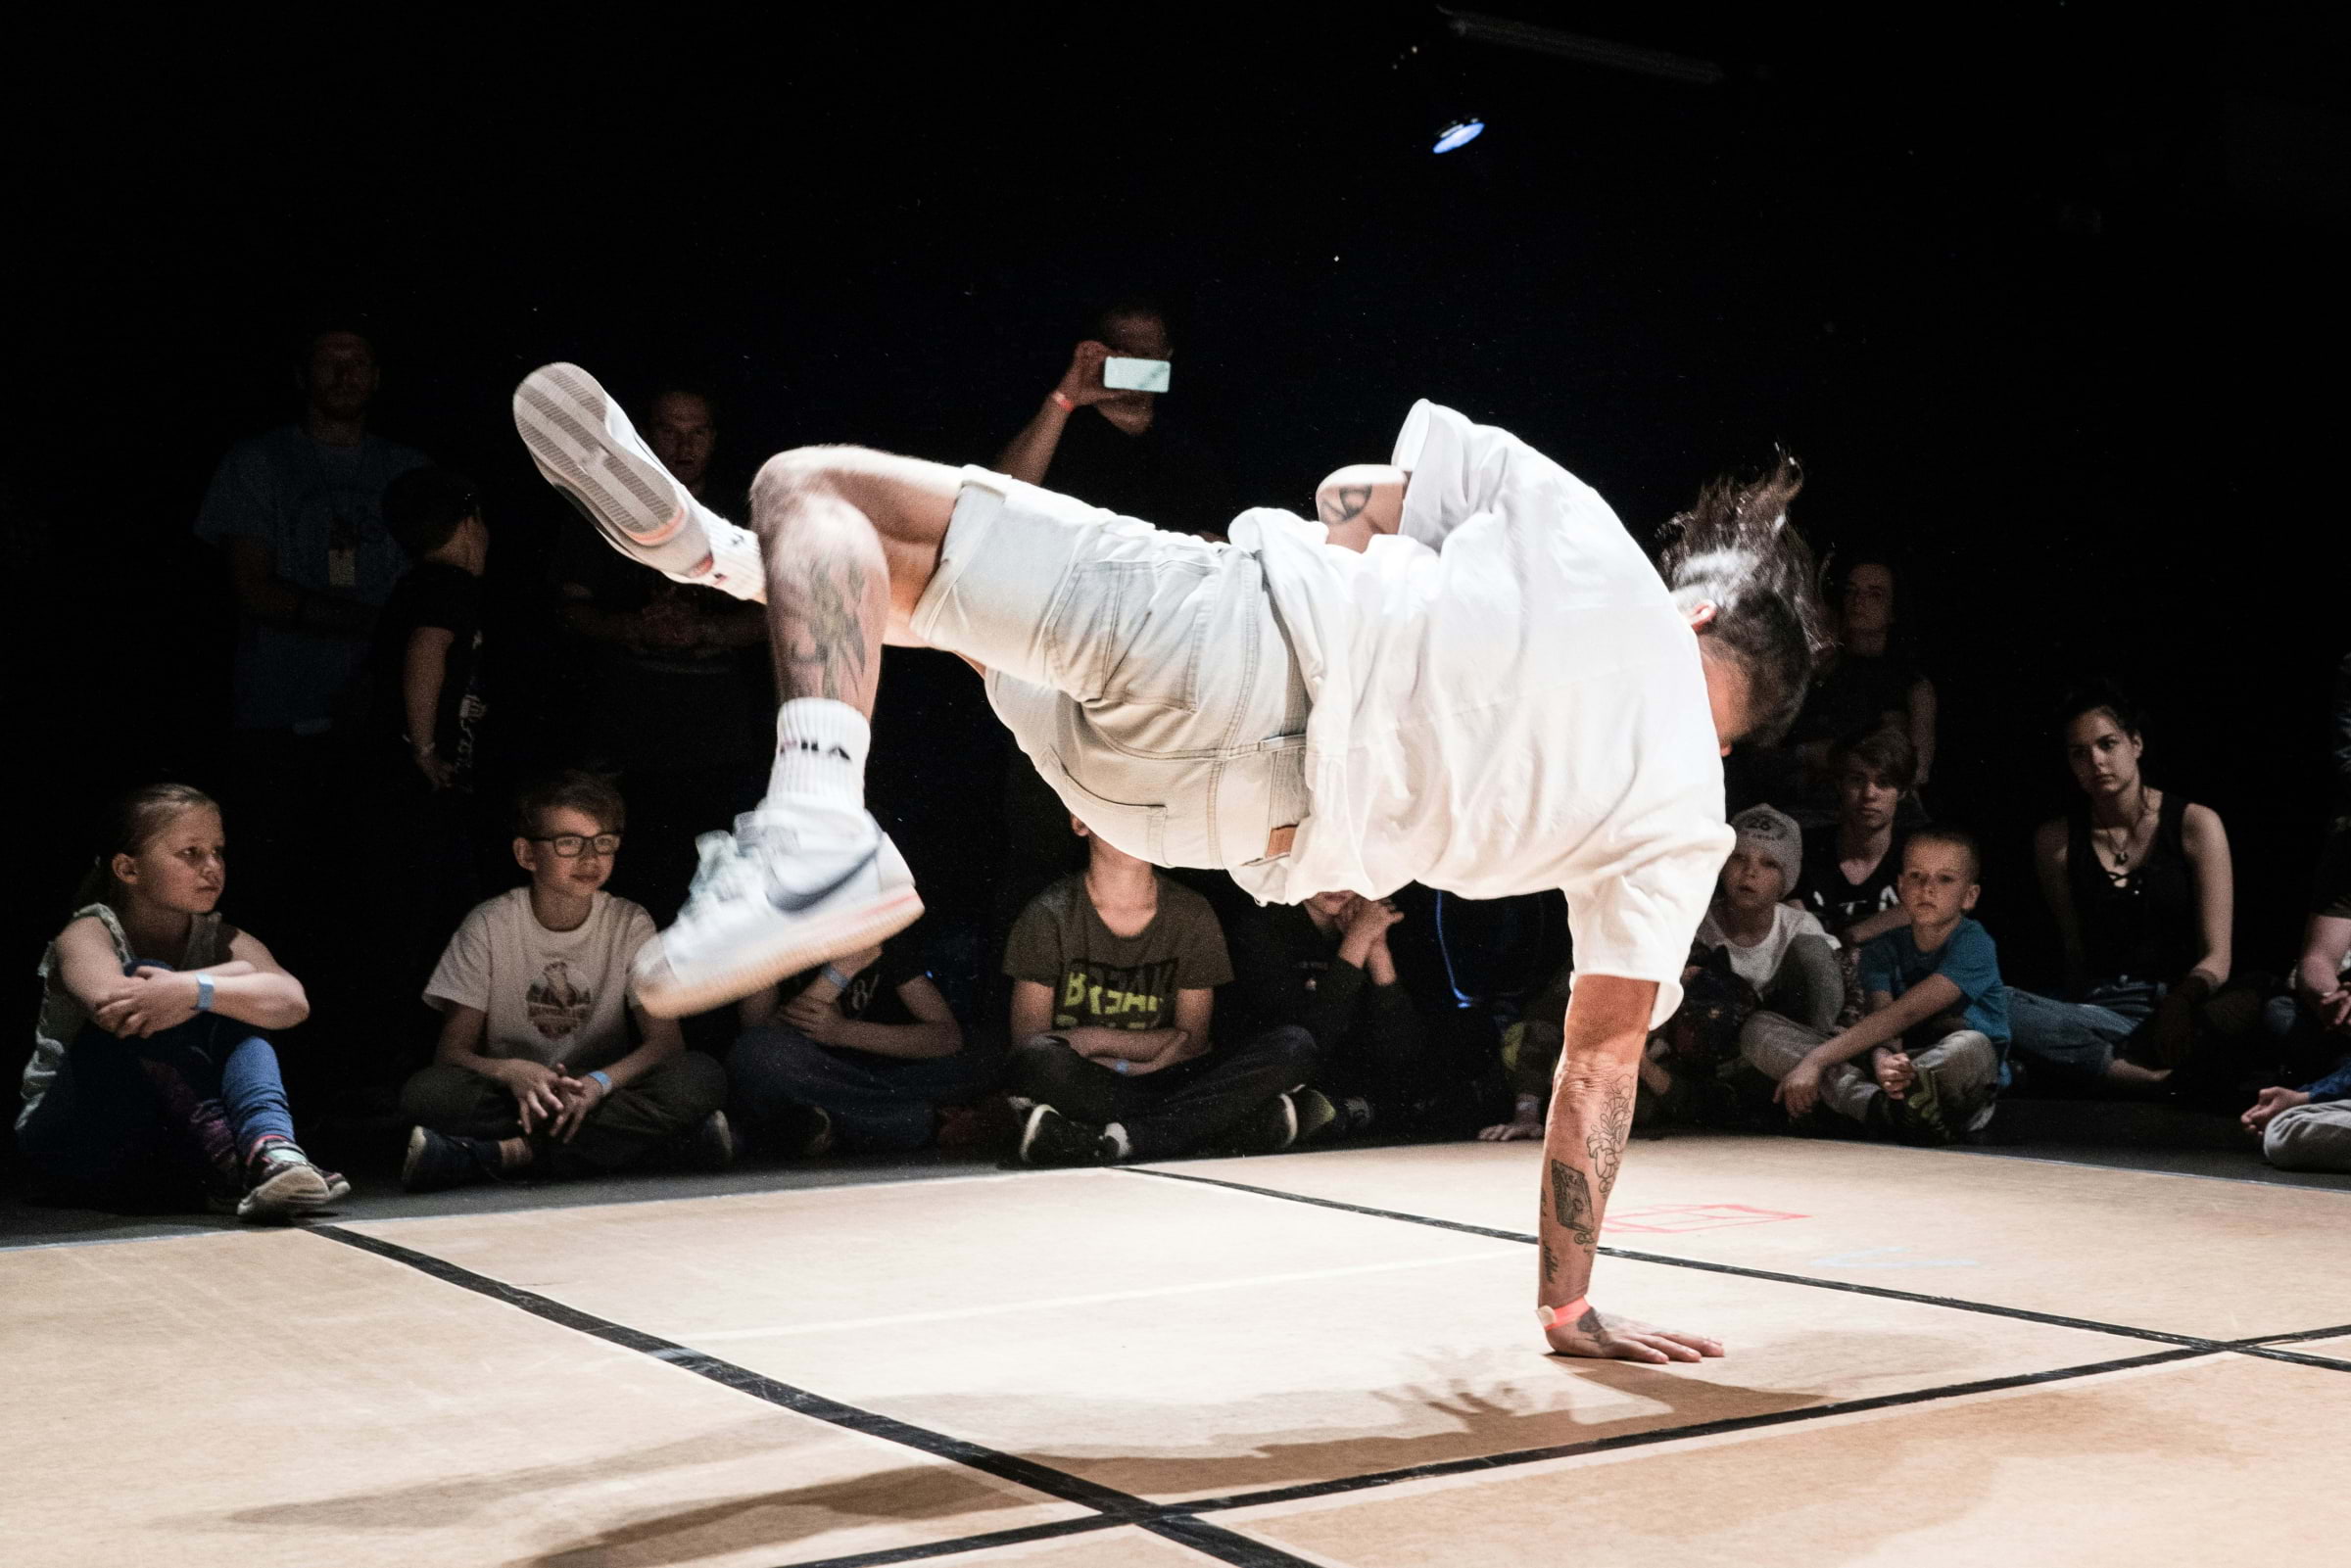 Pick up break dancing with classes at the iconic Battersea Power Station